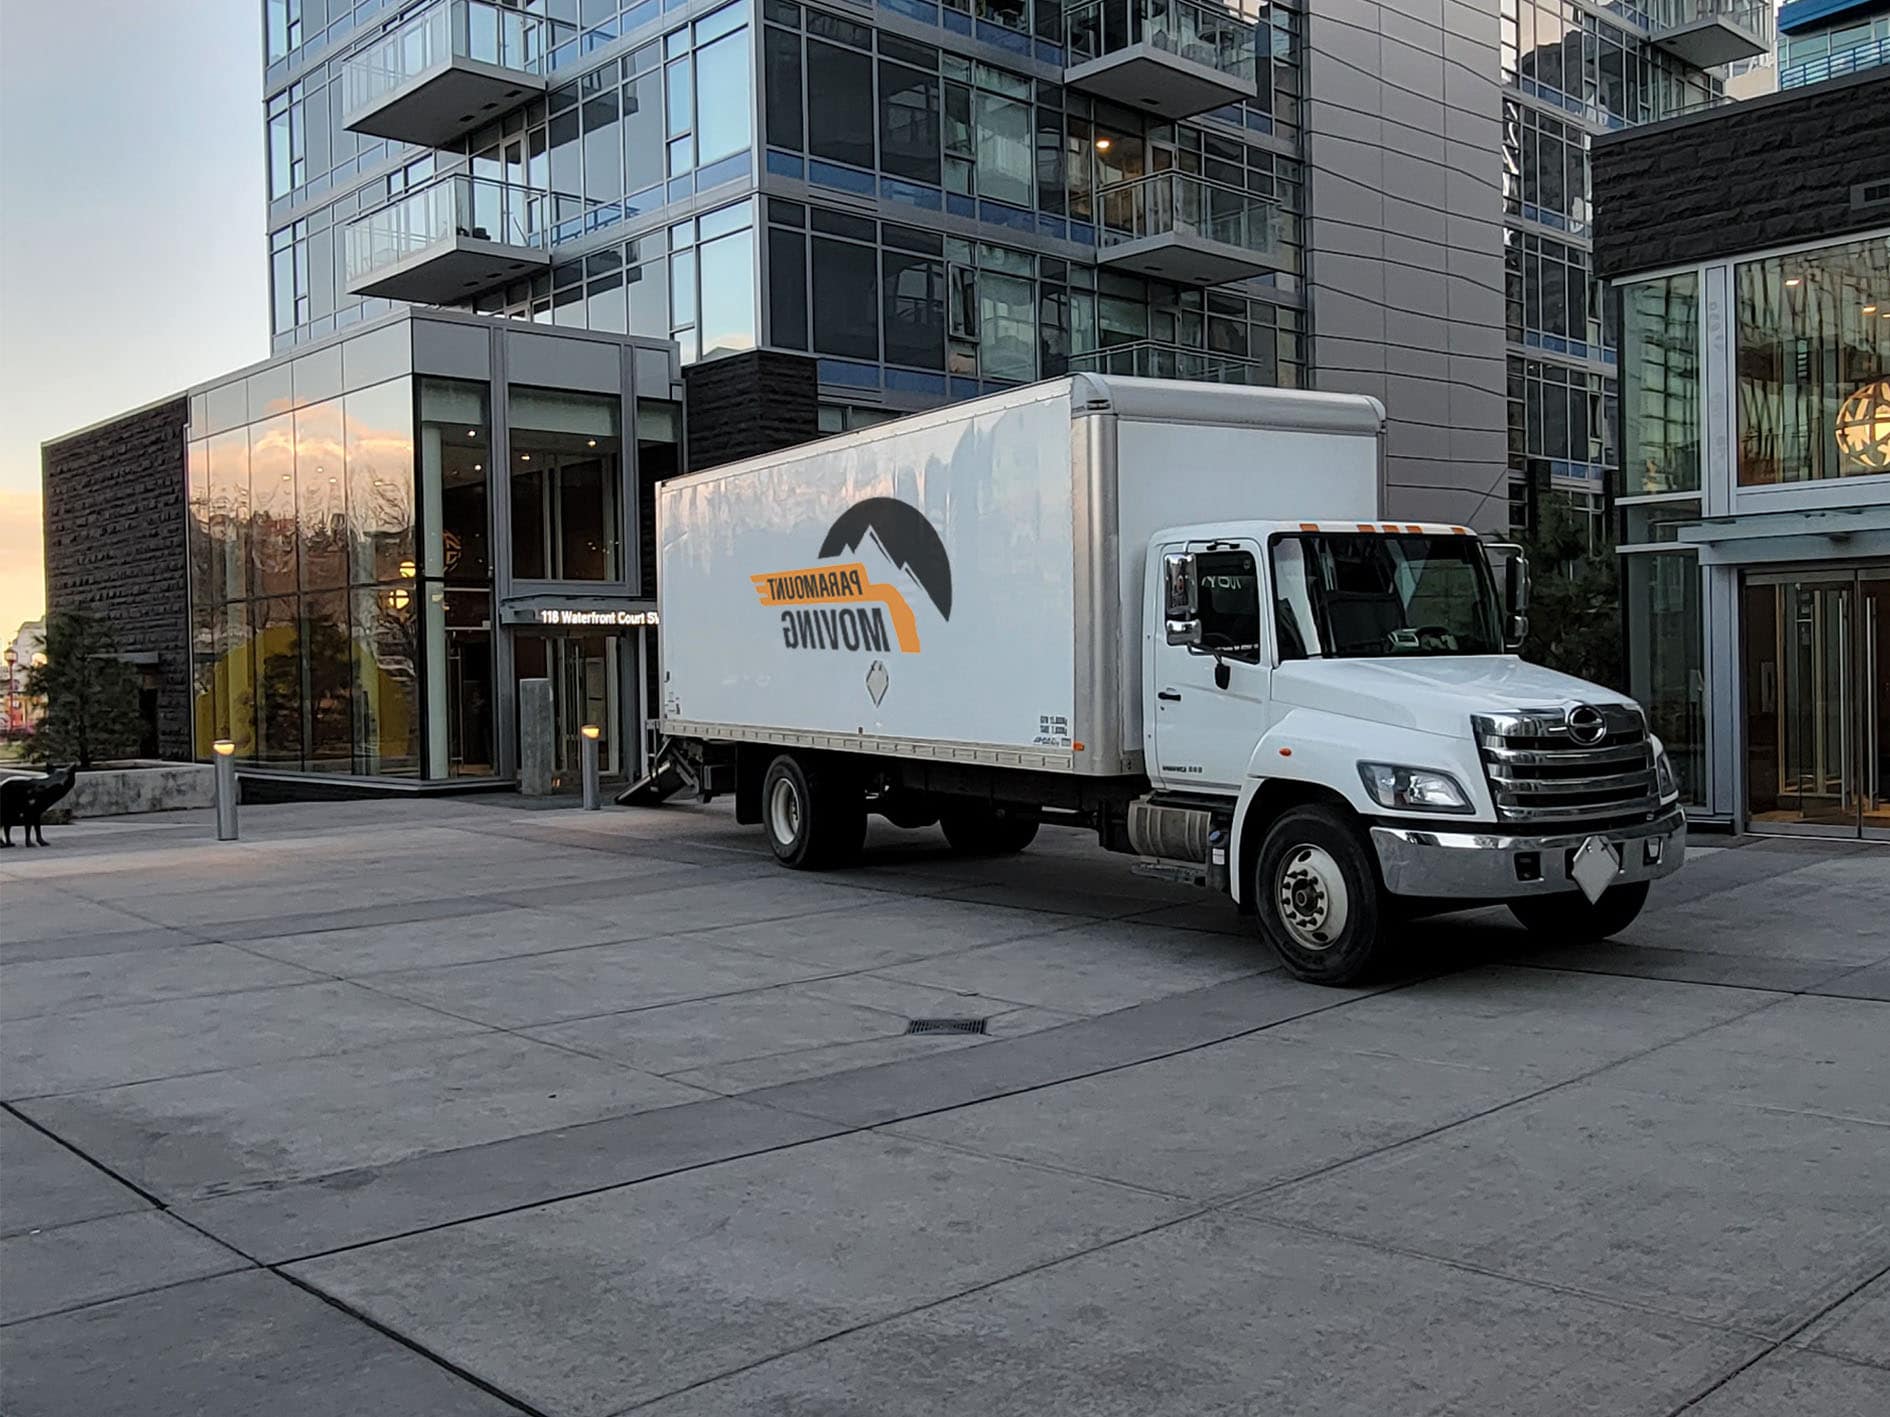 Truck of Affordable Movers ‘Paramount Moving’ ready for an unload